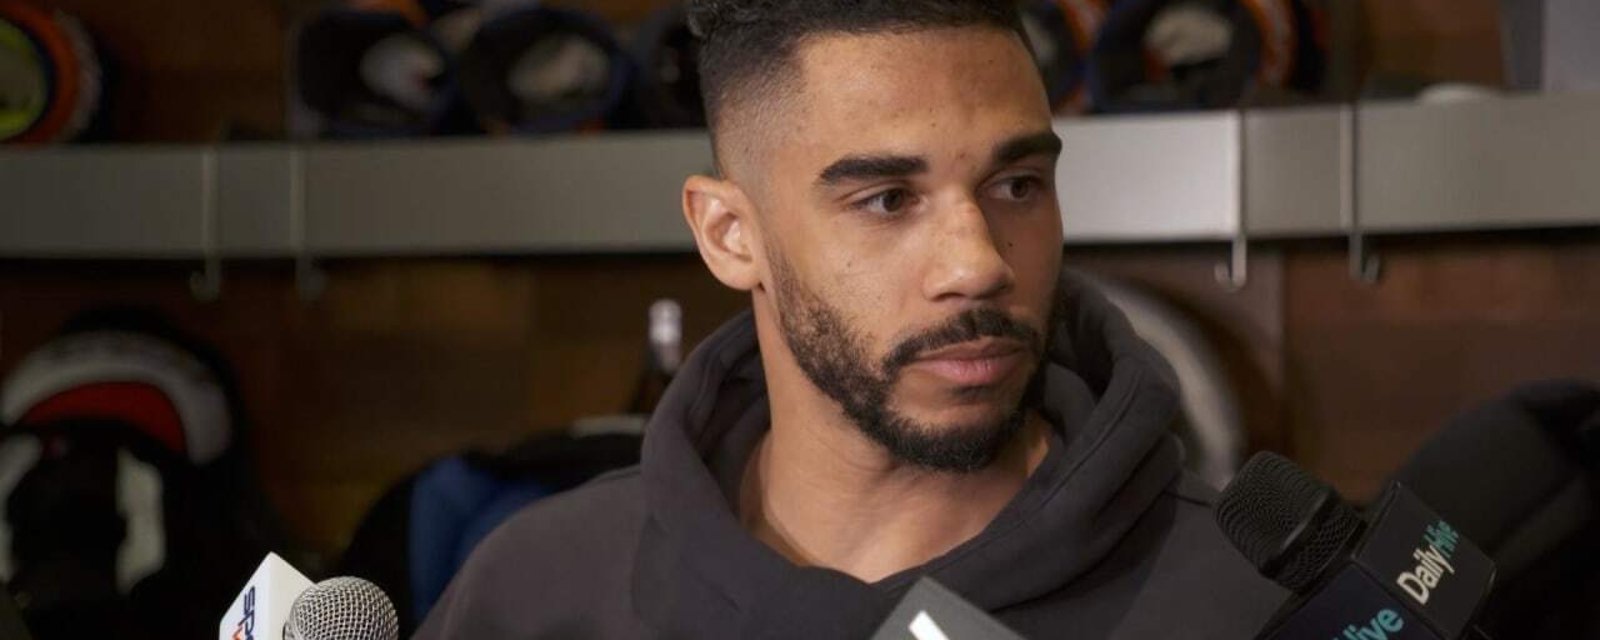 Things turning ugly in cost-costing trade for Evander Kane in Edmonton